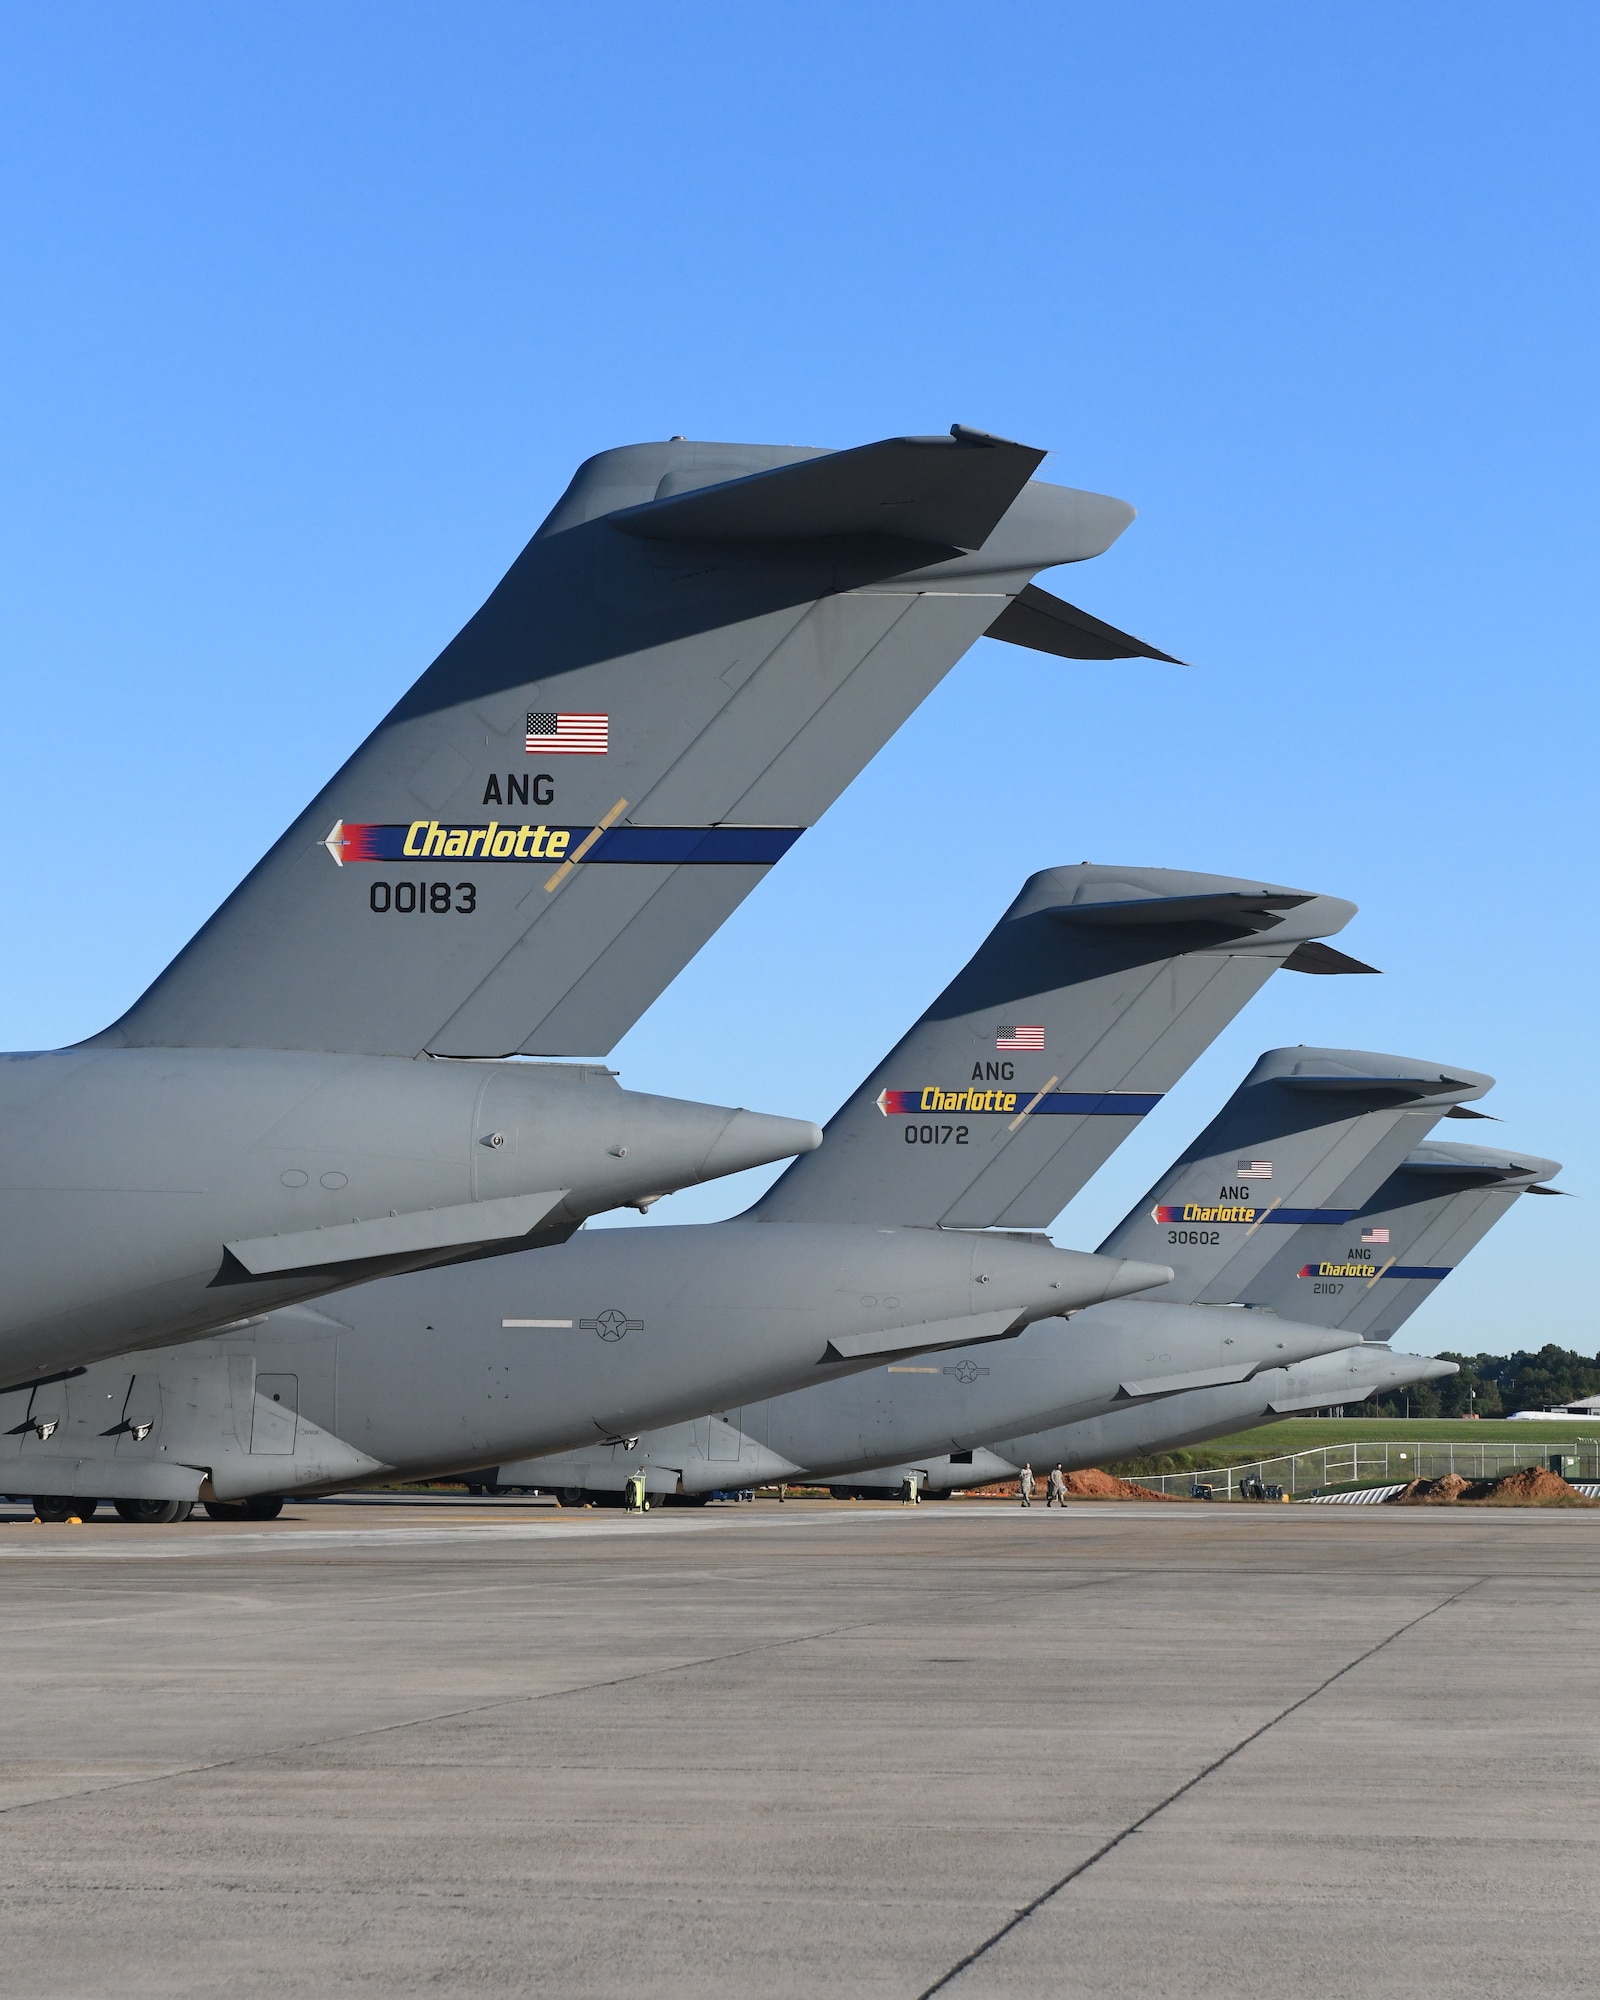 Five C-17 Globemaster III Aircraft belonging to the 145th Airlift Wing are parked in a row on a sunny day at the  North Carolina Air National Guard Base, Charlotte Douglas International Airport, October 14, 2020. The 145th Airlift Wing began converting from C-130 Hercules to the C-17 in October of 2017 and officially exited conversion in October 2020.